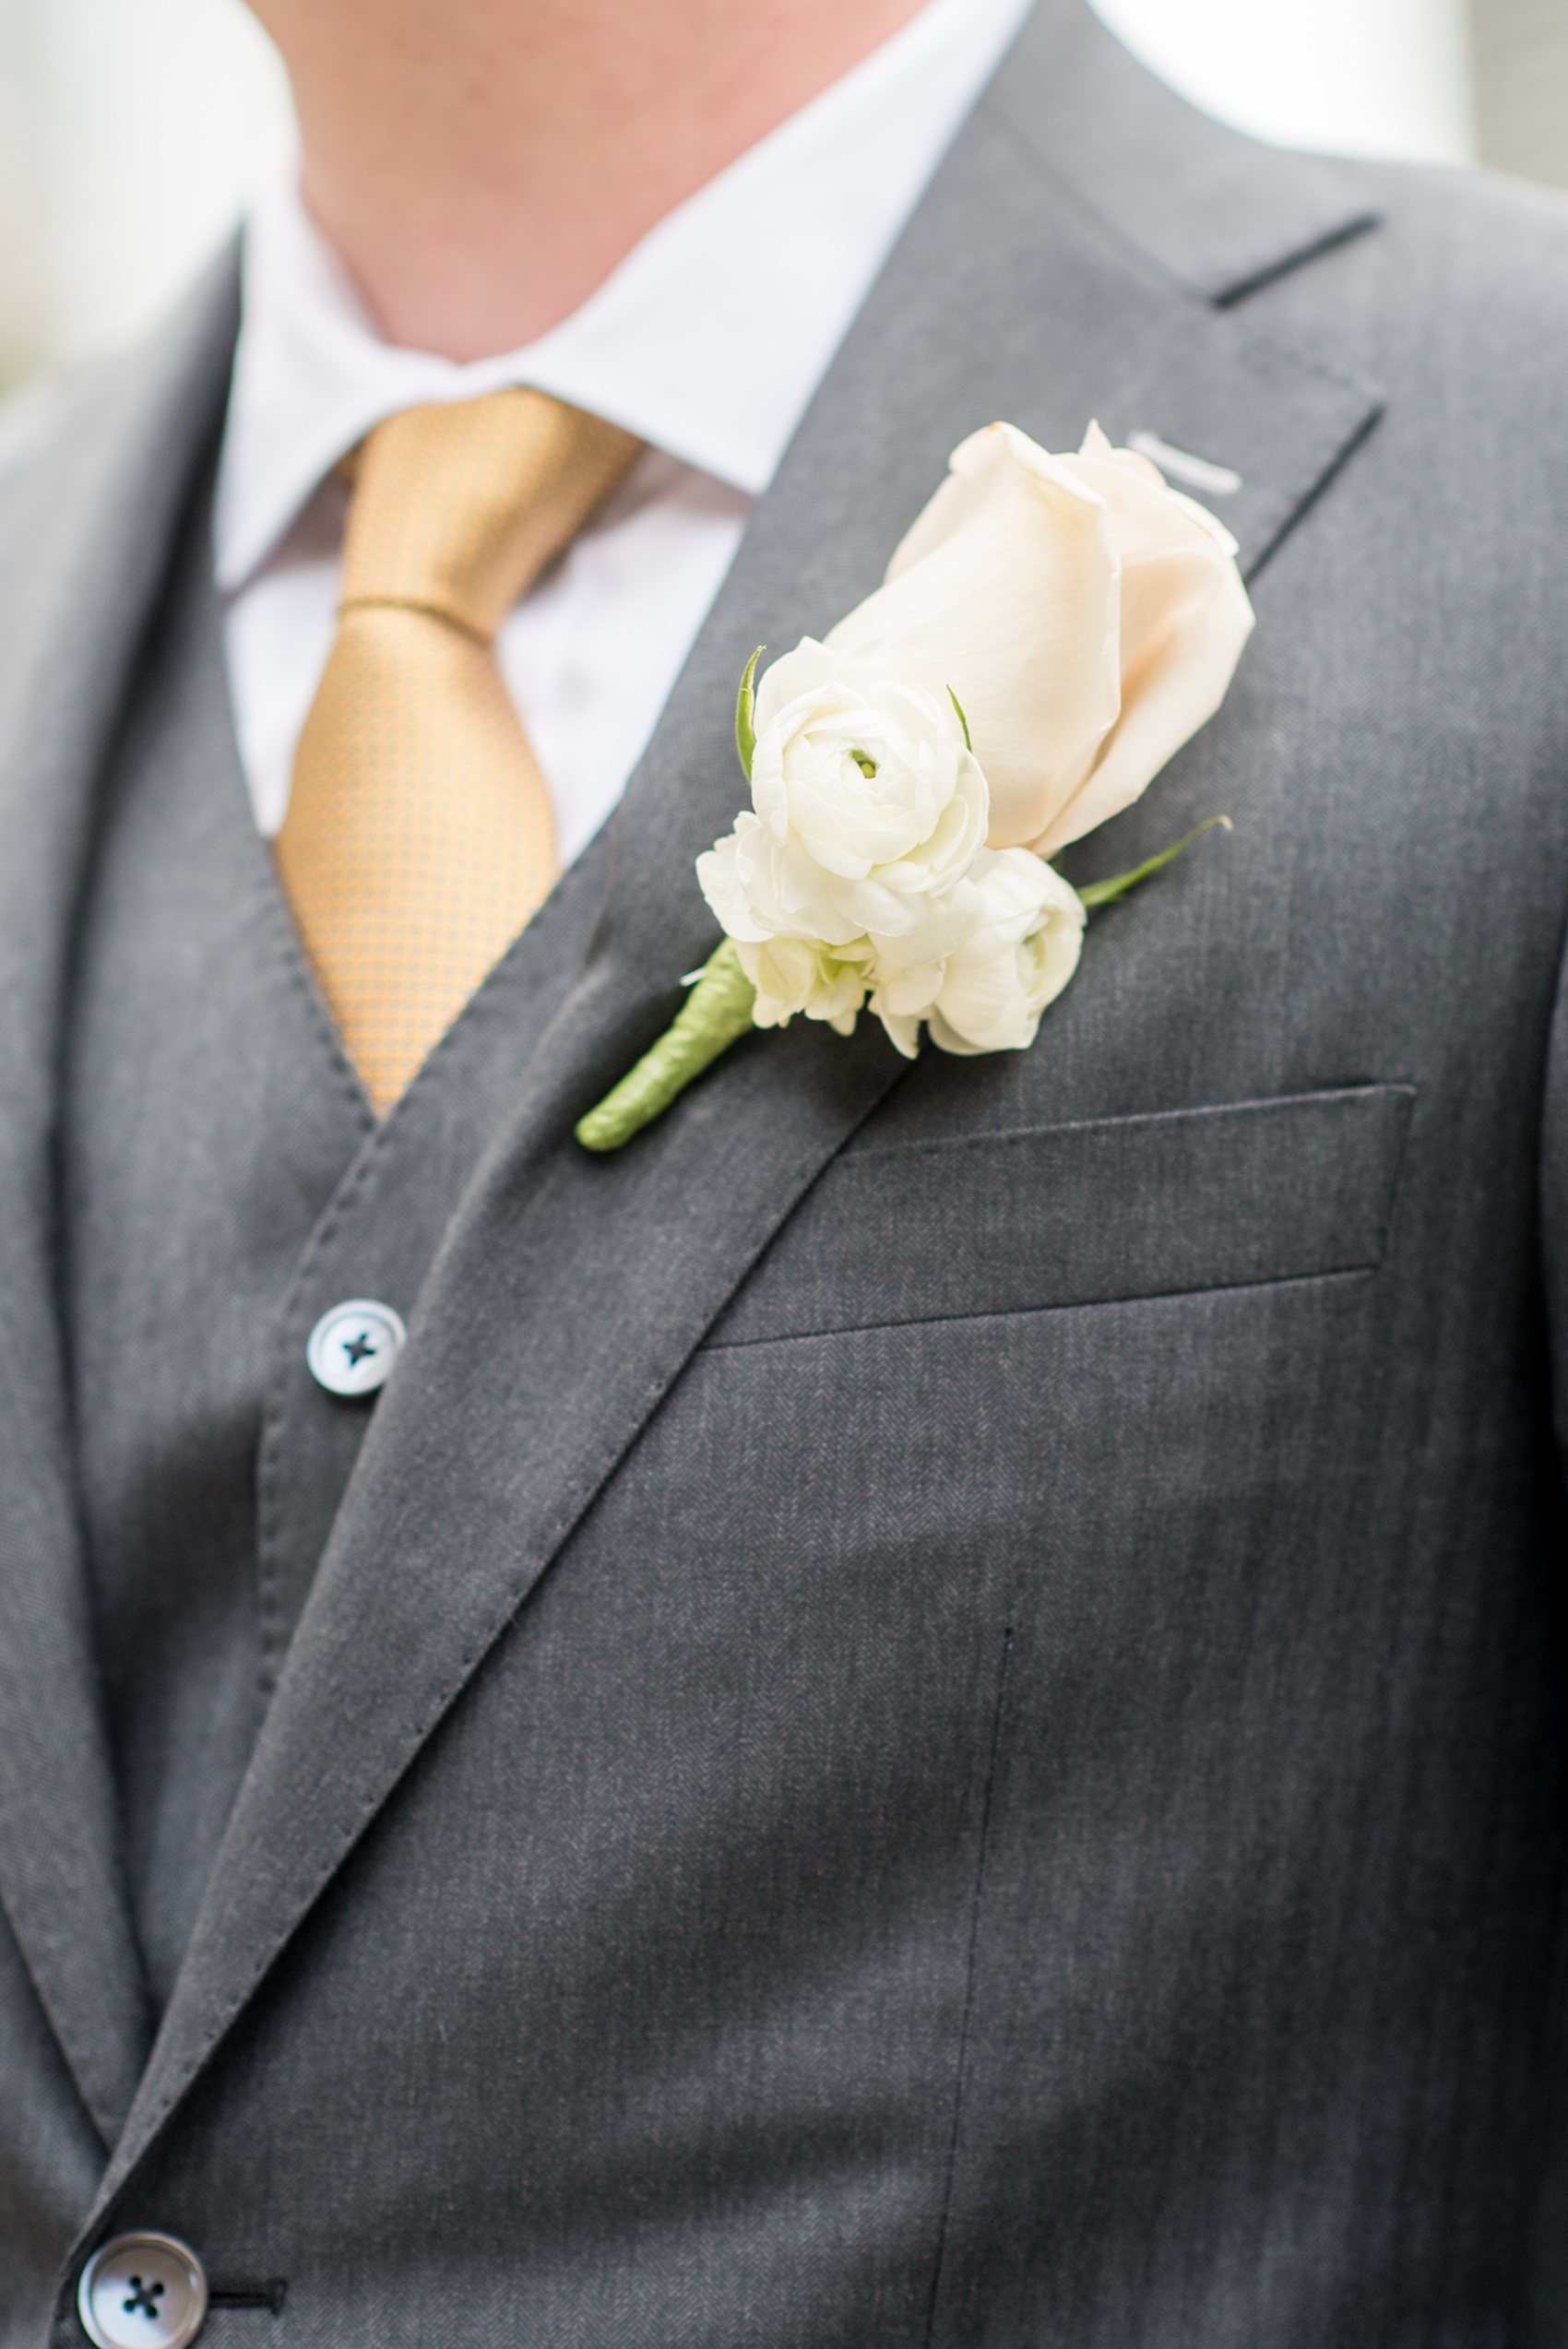 Mikkel Paige Photography photos of a wedding in downtown Chicago at The Rookery. The groom wore a three piece grey suit and had a rose and ranunculus all white boutonniere.